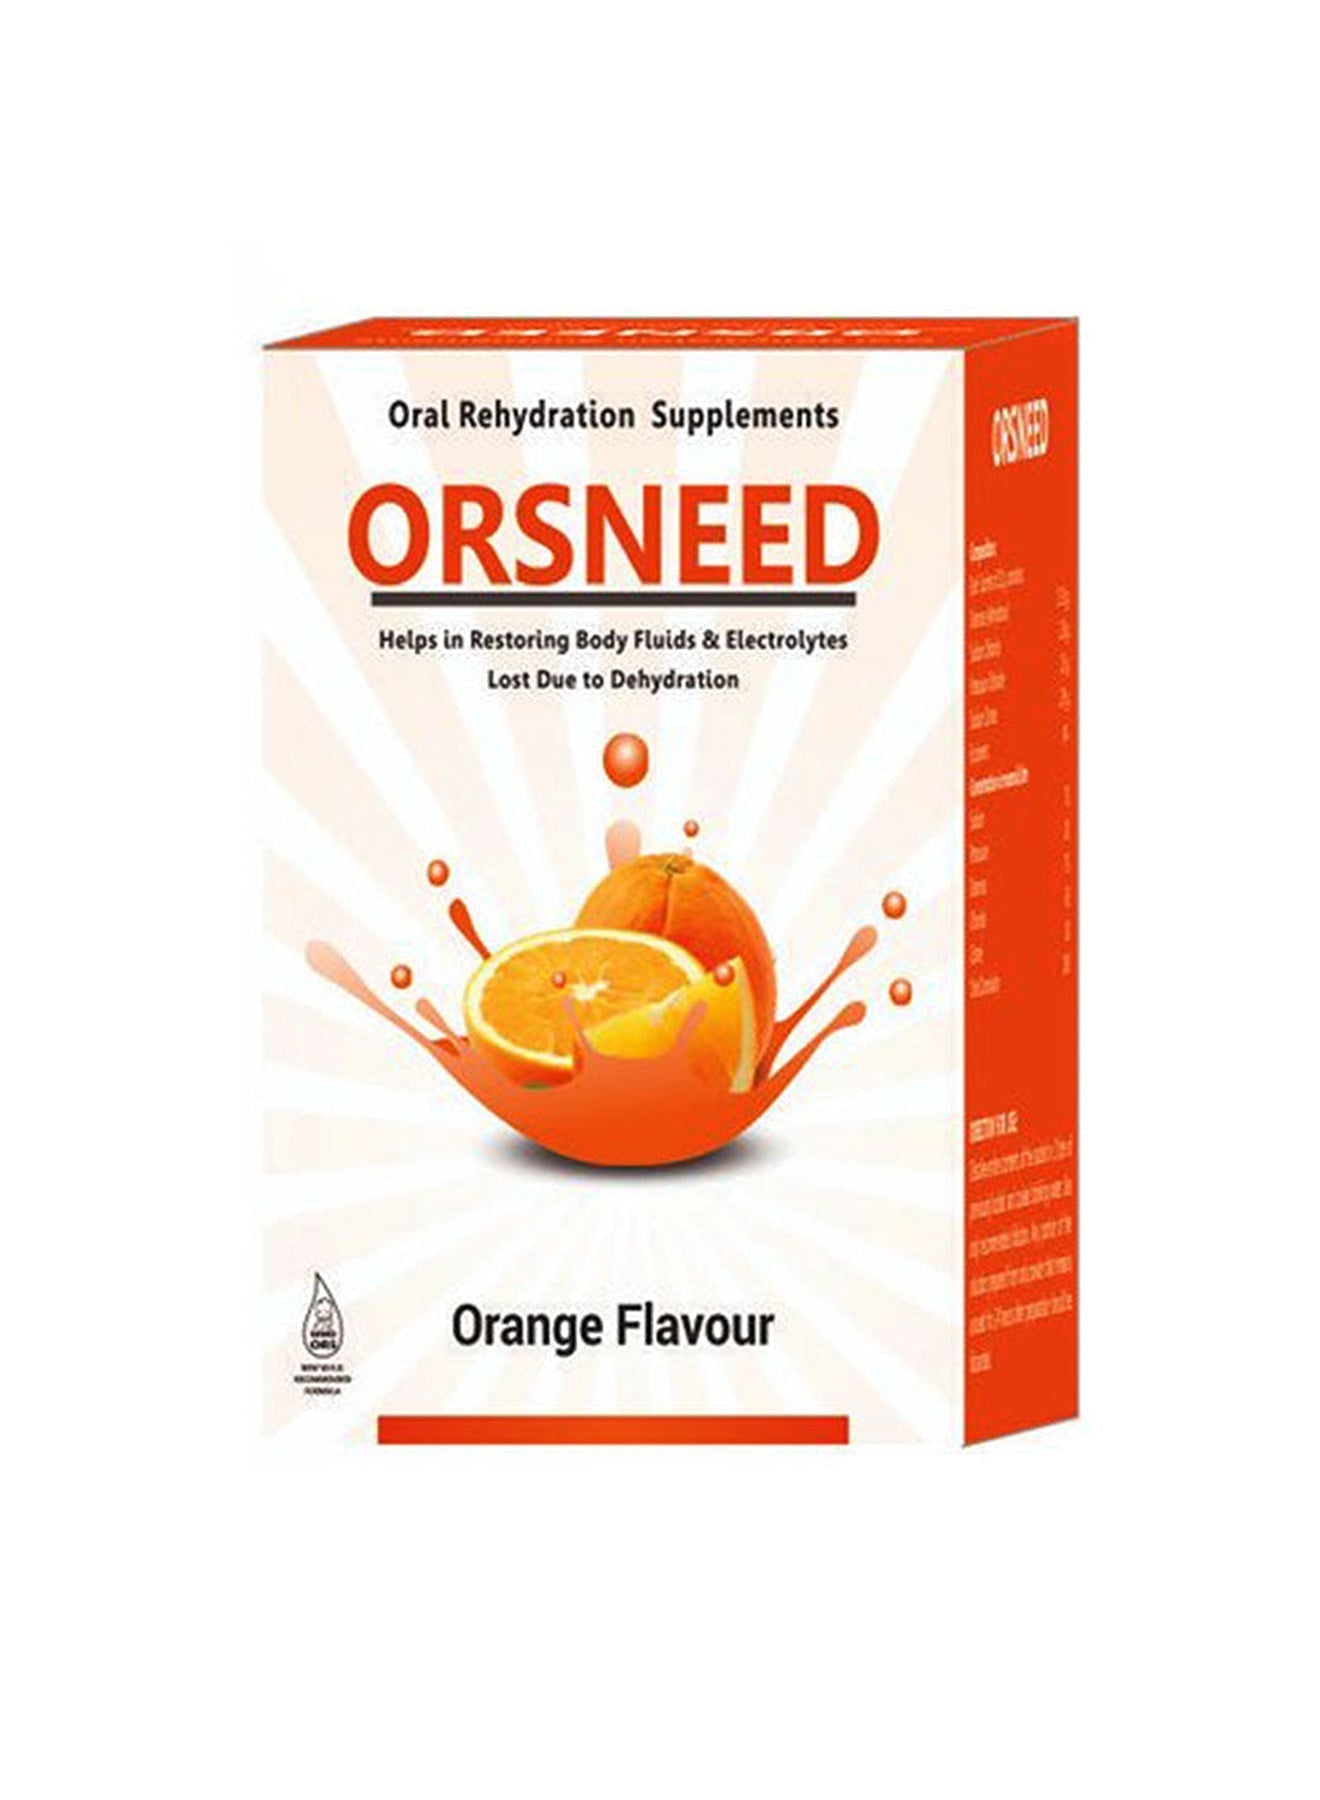 ORSNEED Oral Rehydration Supplements Orange Flavor 10x42g Value Pack of 12 